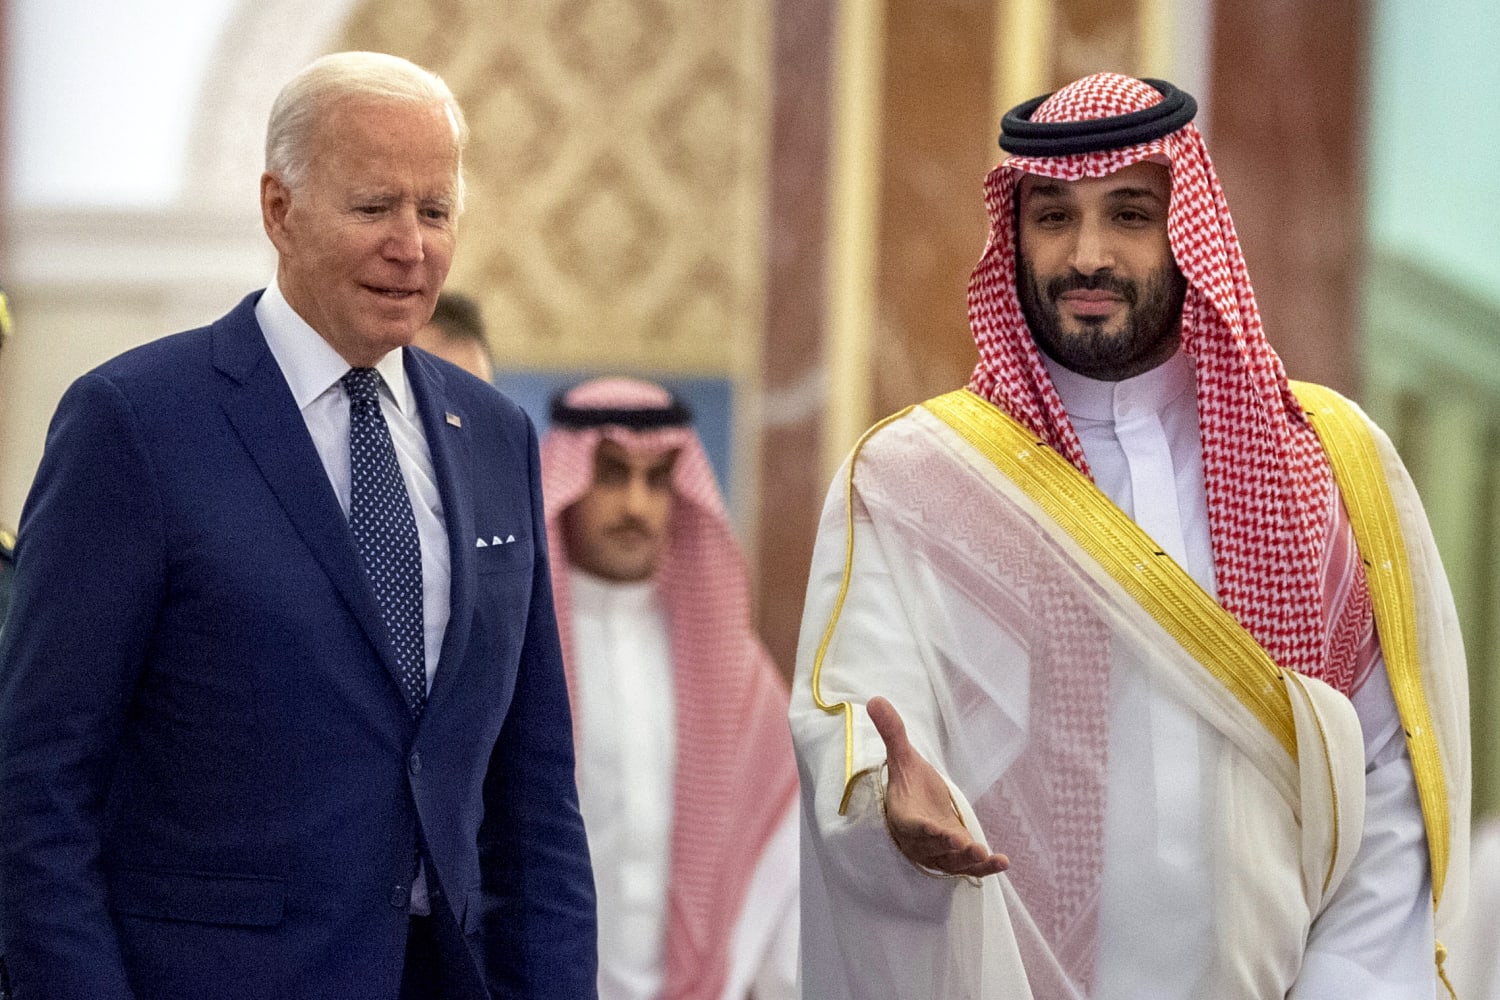 What does the Iran-Saudi Arabia truce mean for Washington’s standing on the global stage?